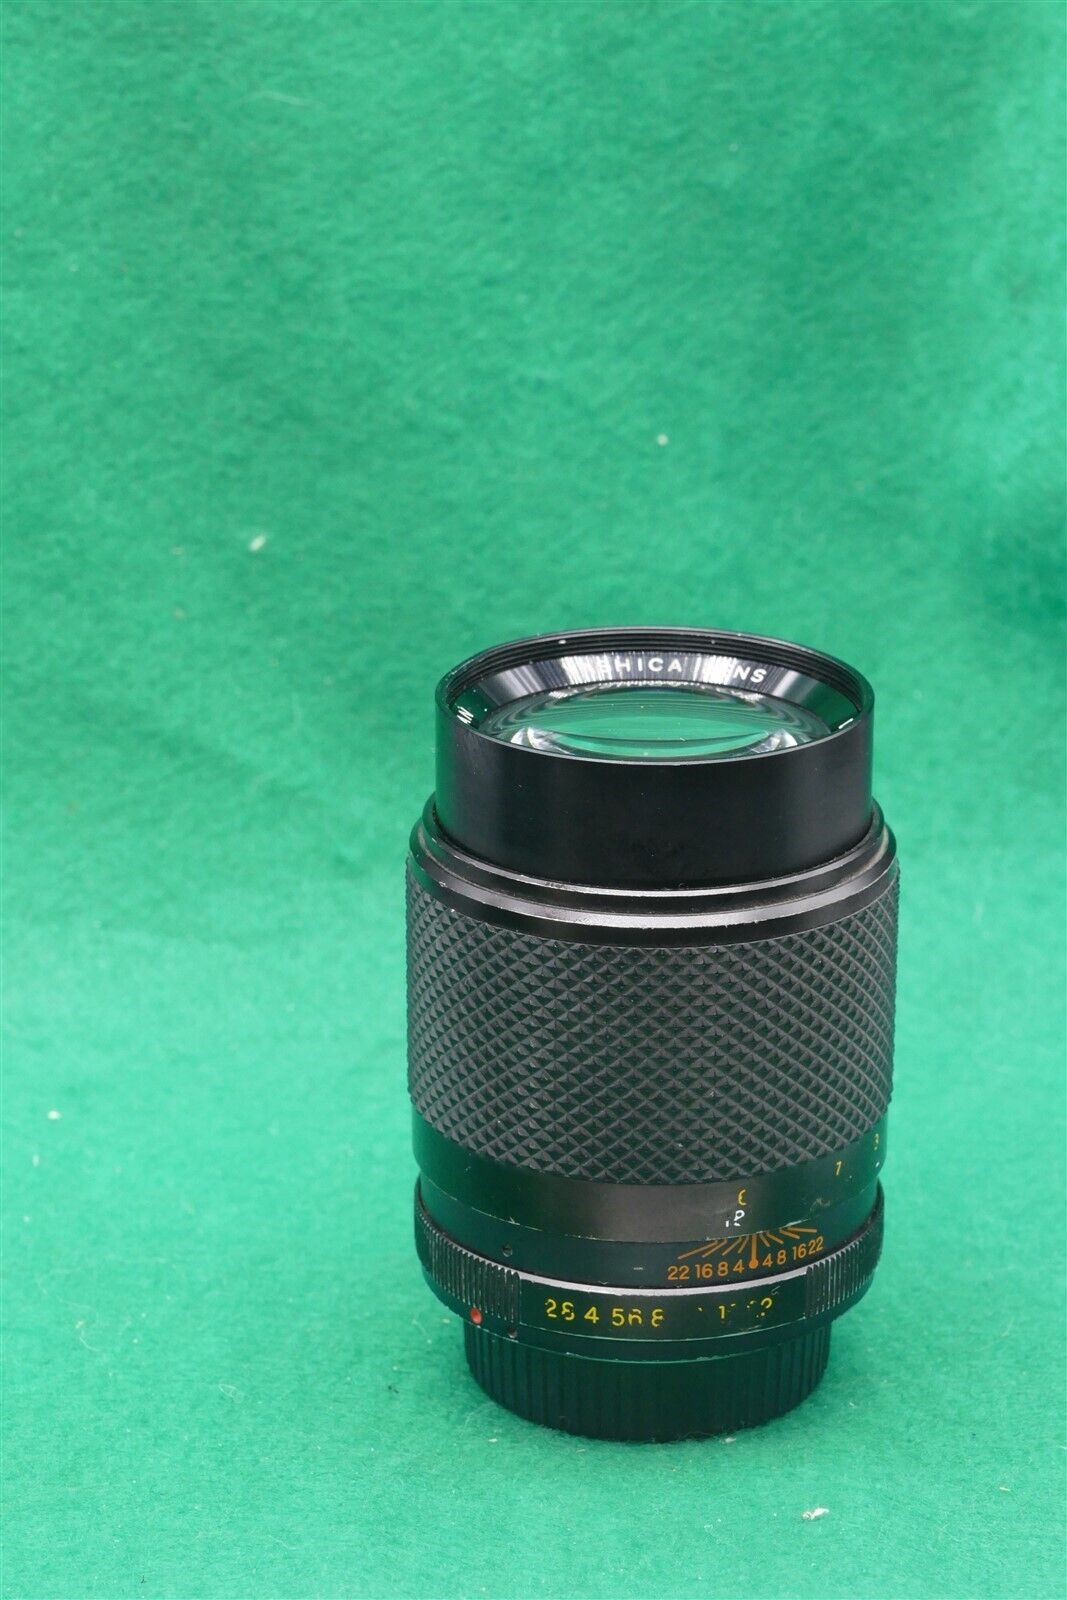 Yashica DSB 135mm f2.8 lens For Contax/ Yashica Mount Manual Focus Cameras